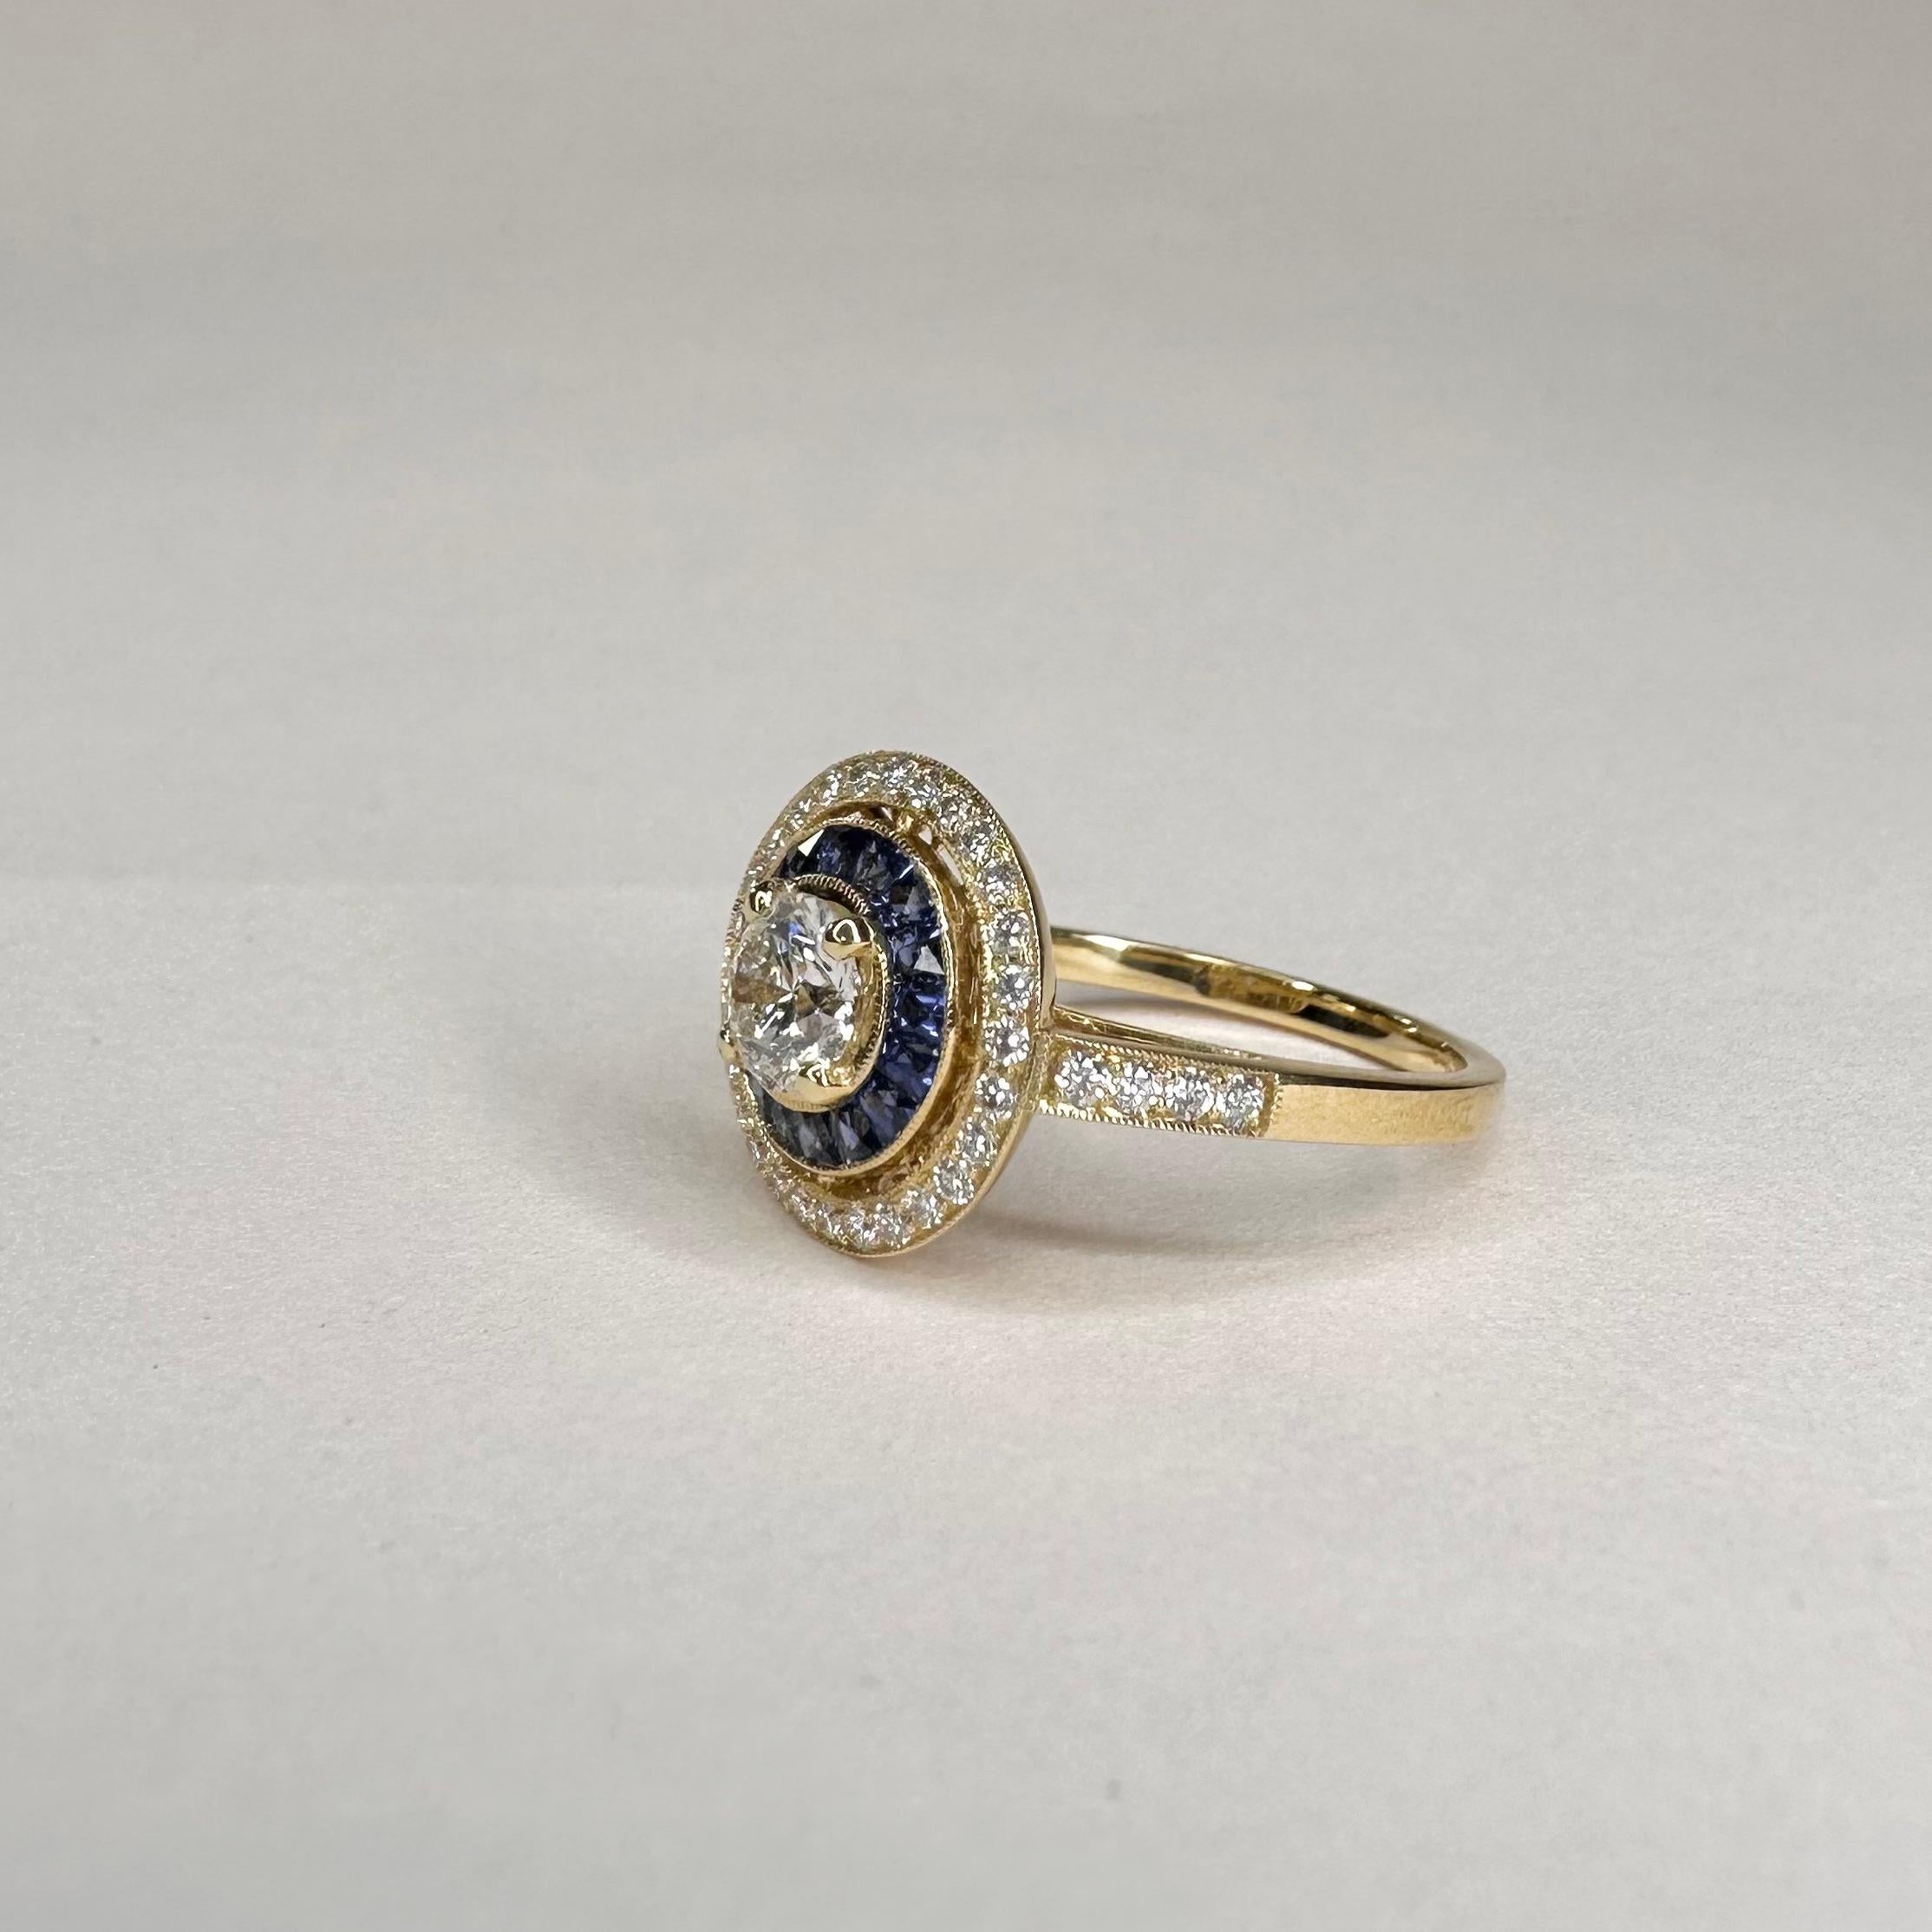 For Sale:  Art Deco Style 18k Yellow Gold Calibre Cut Sapphire Ring With 0.75 Ct Diamond 6